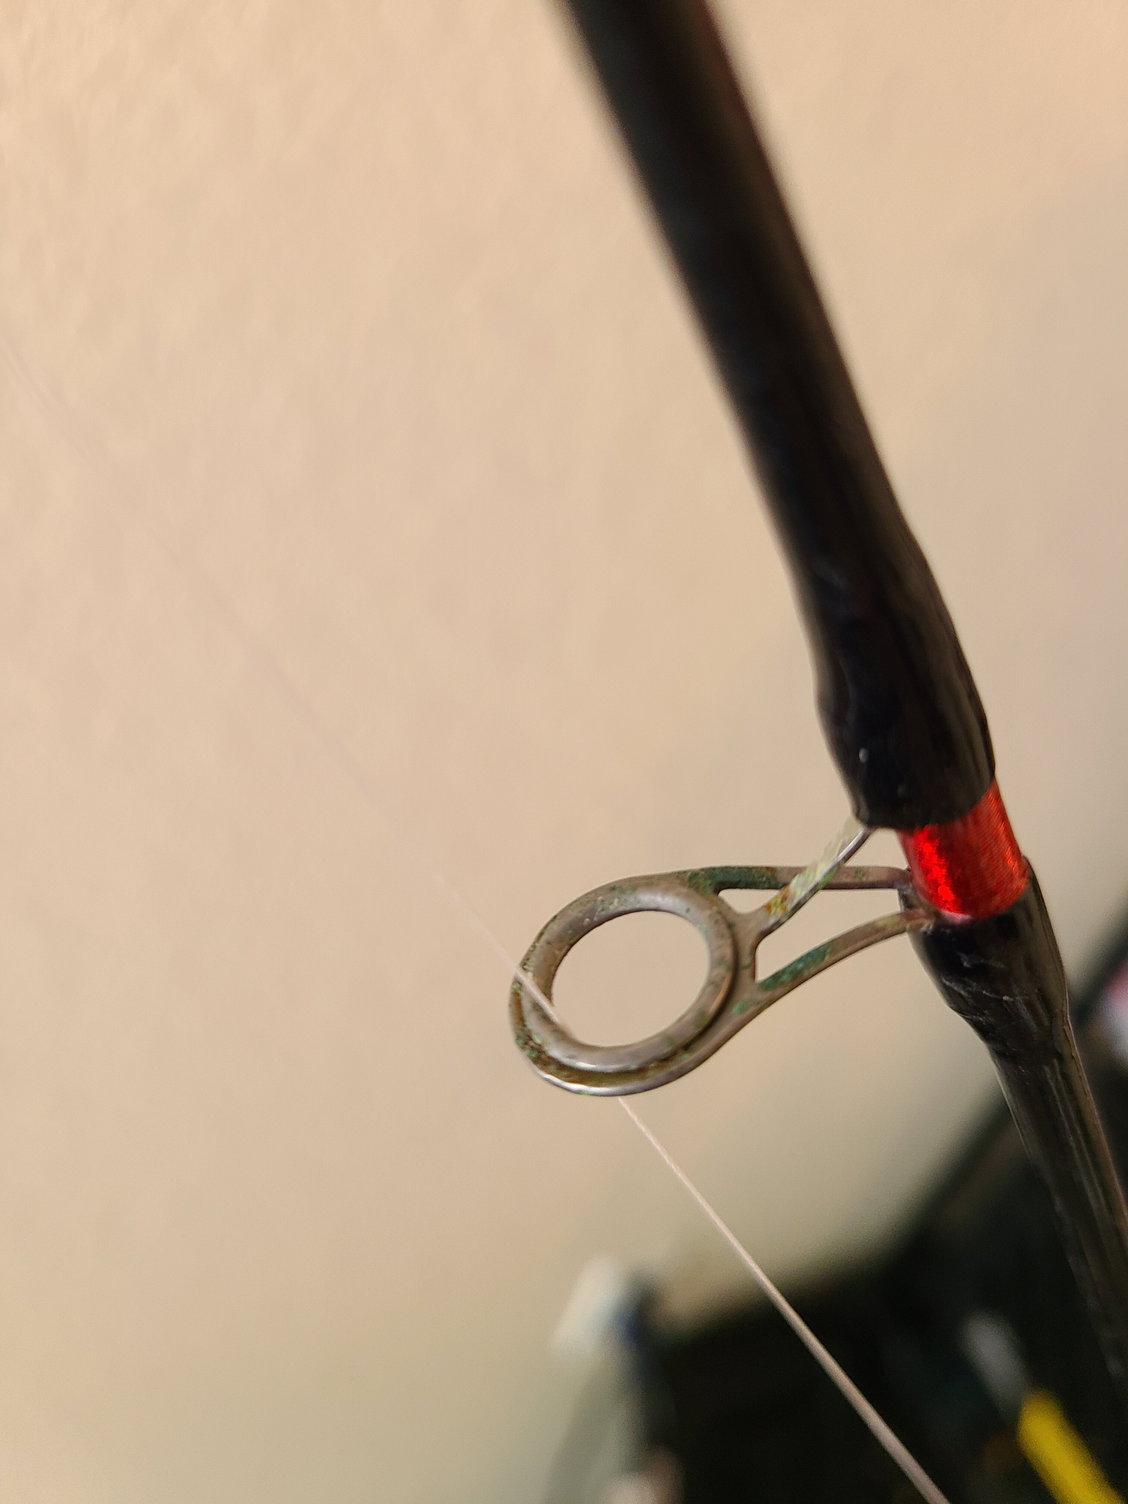 How to fix fishing rod guides/eyes  rust and green corrosion from  saltwater? - The Hull Truth - Boating and Fishing Forum